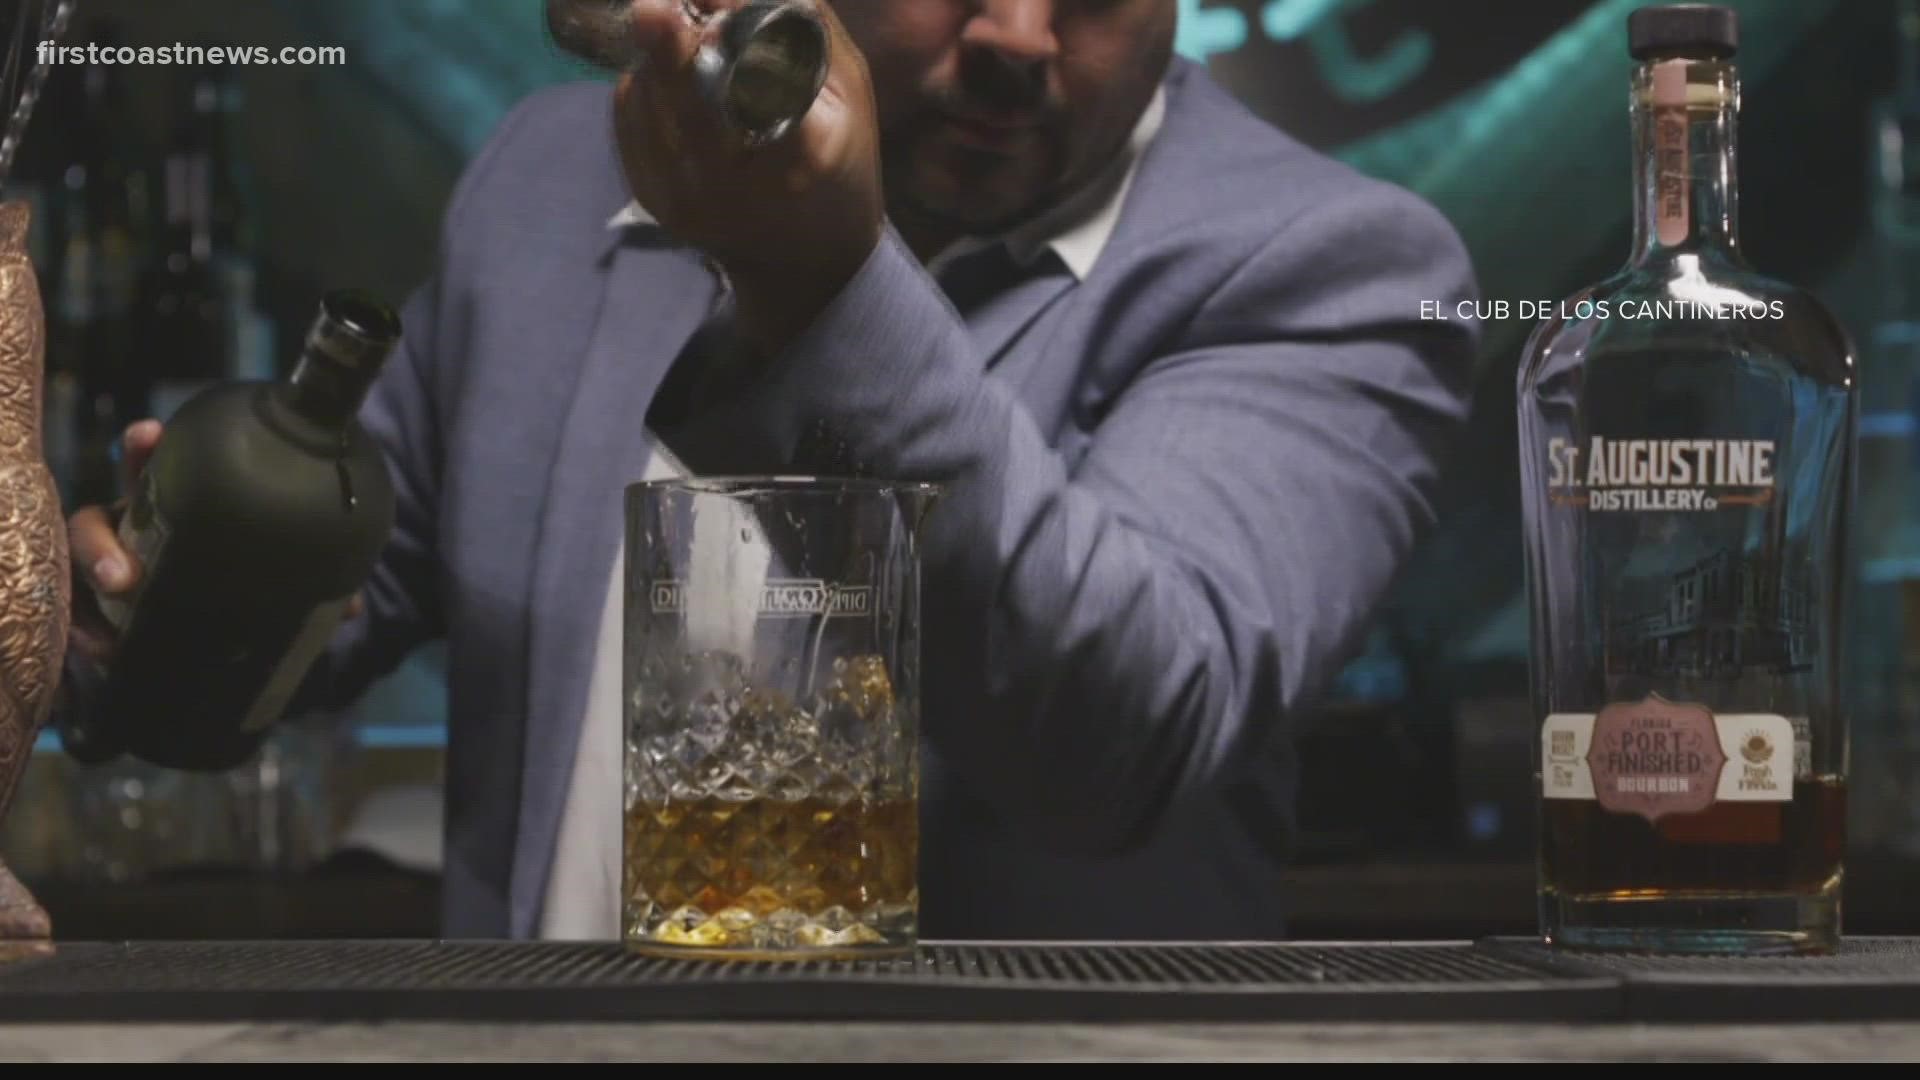 The documentary is about the history of Hispanics and women in the cocktail industry.